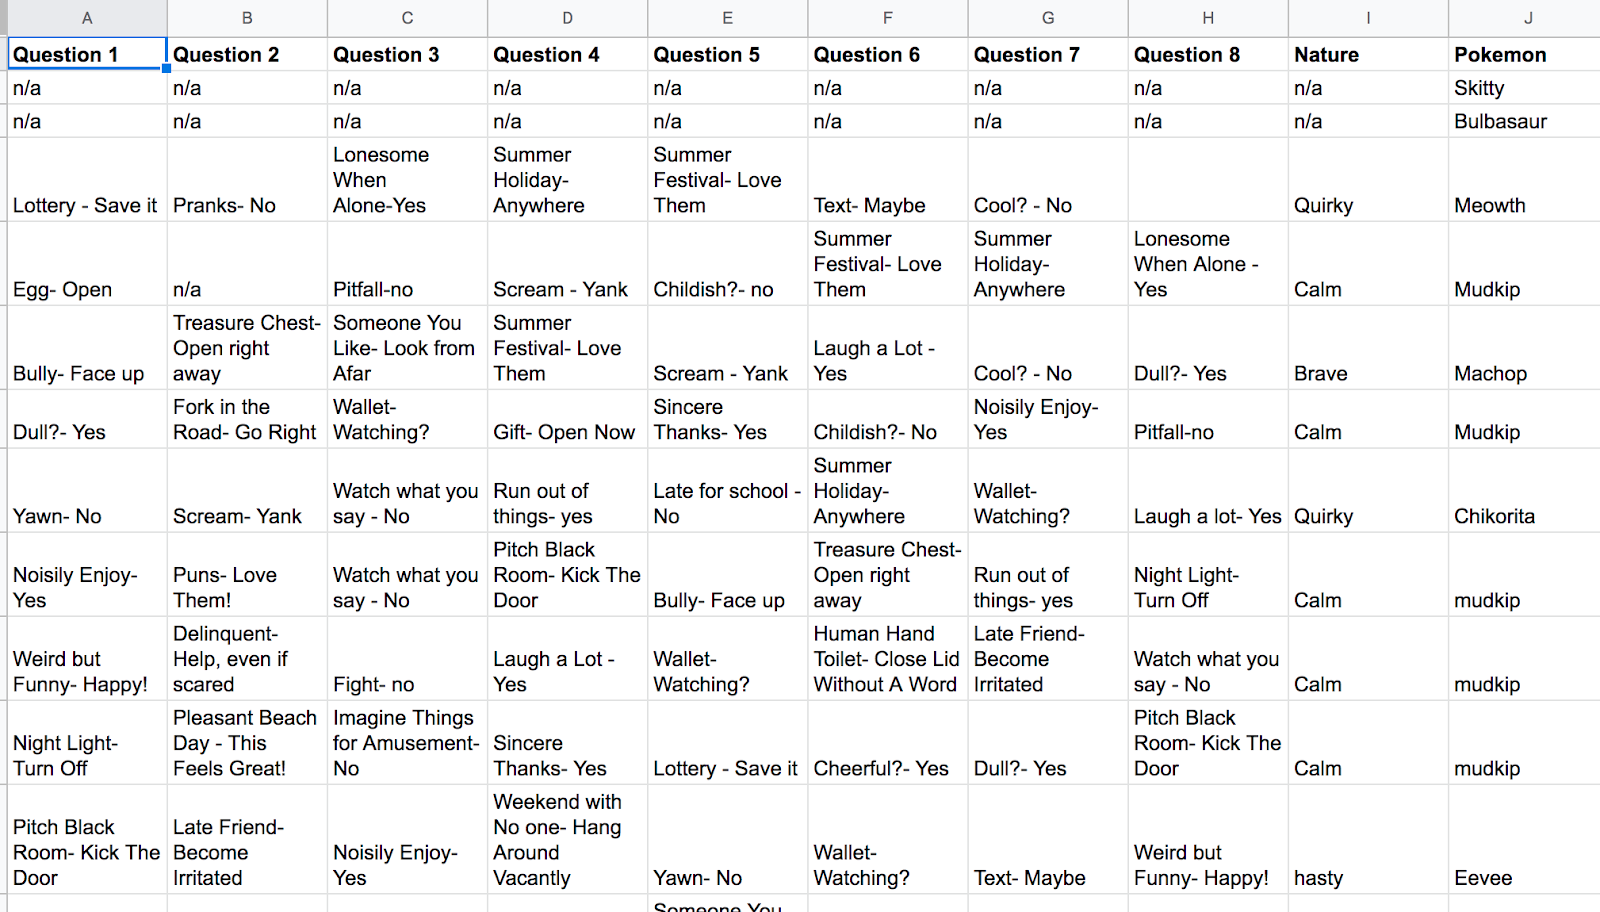 A spreadsheet with various entries for each time I took this personality quiz